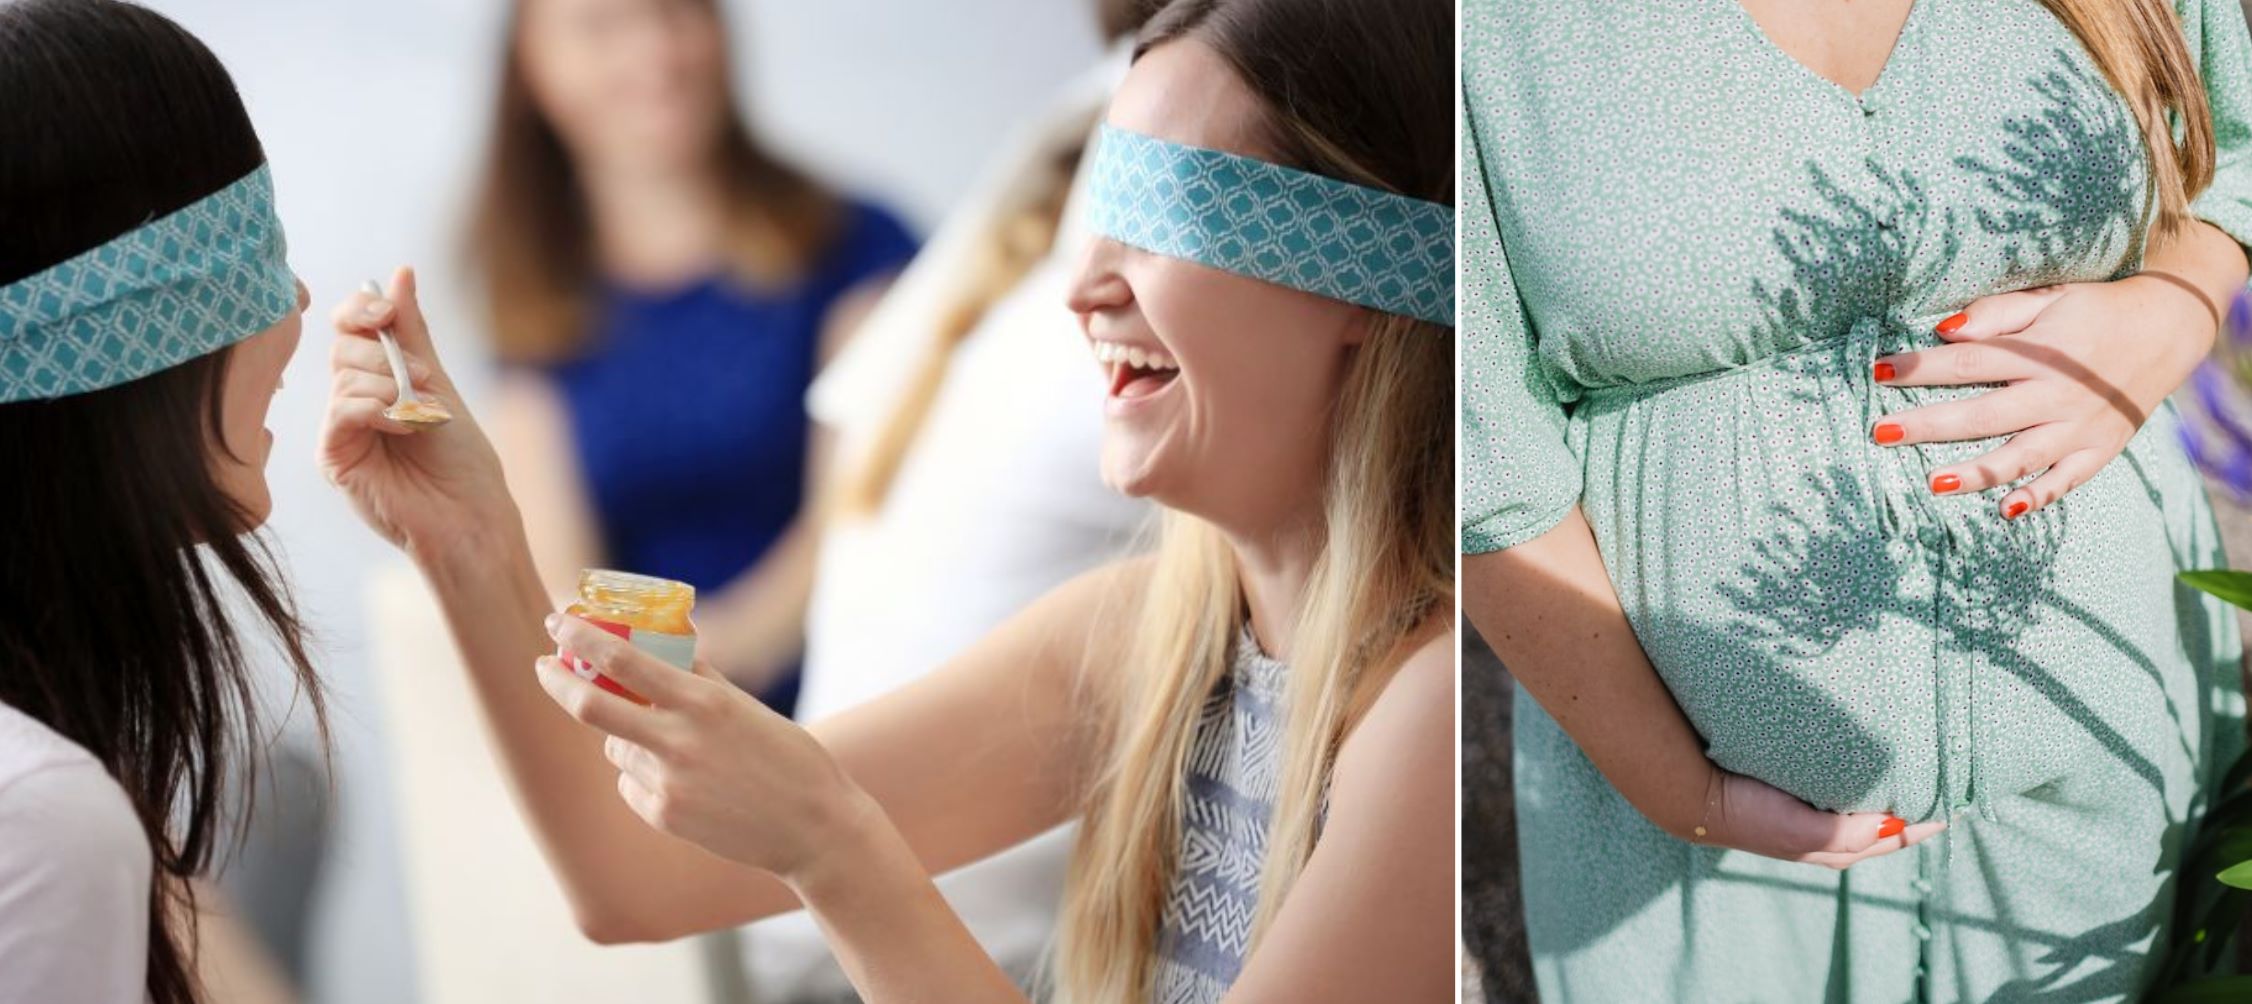 5 of the Worst Baby Shower Games Worth Avoiding